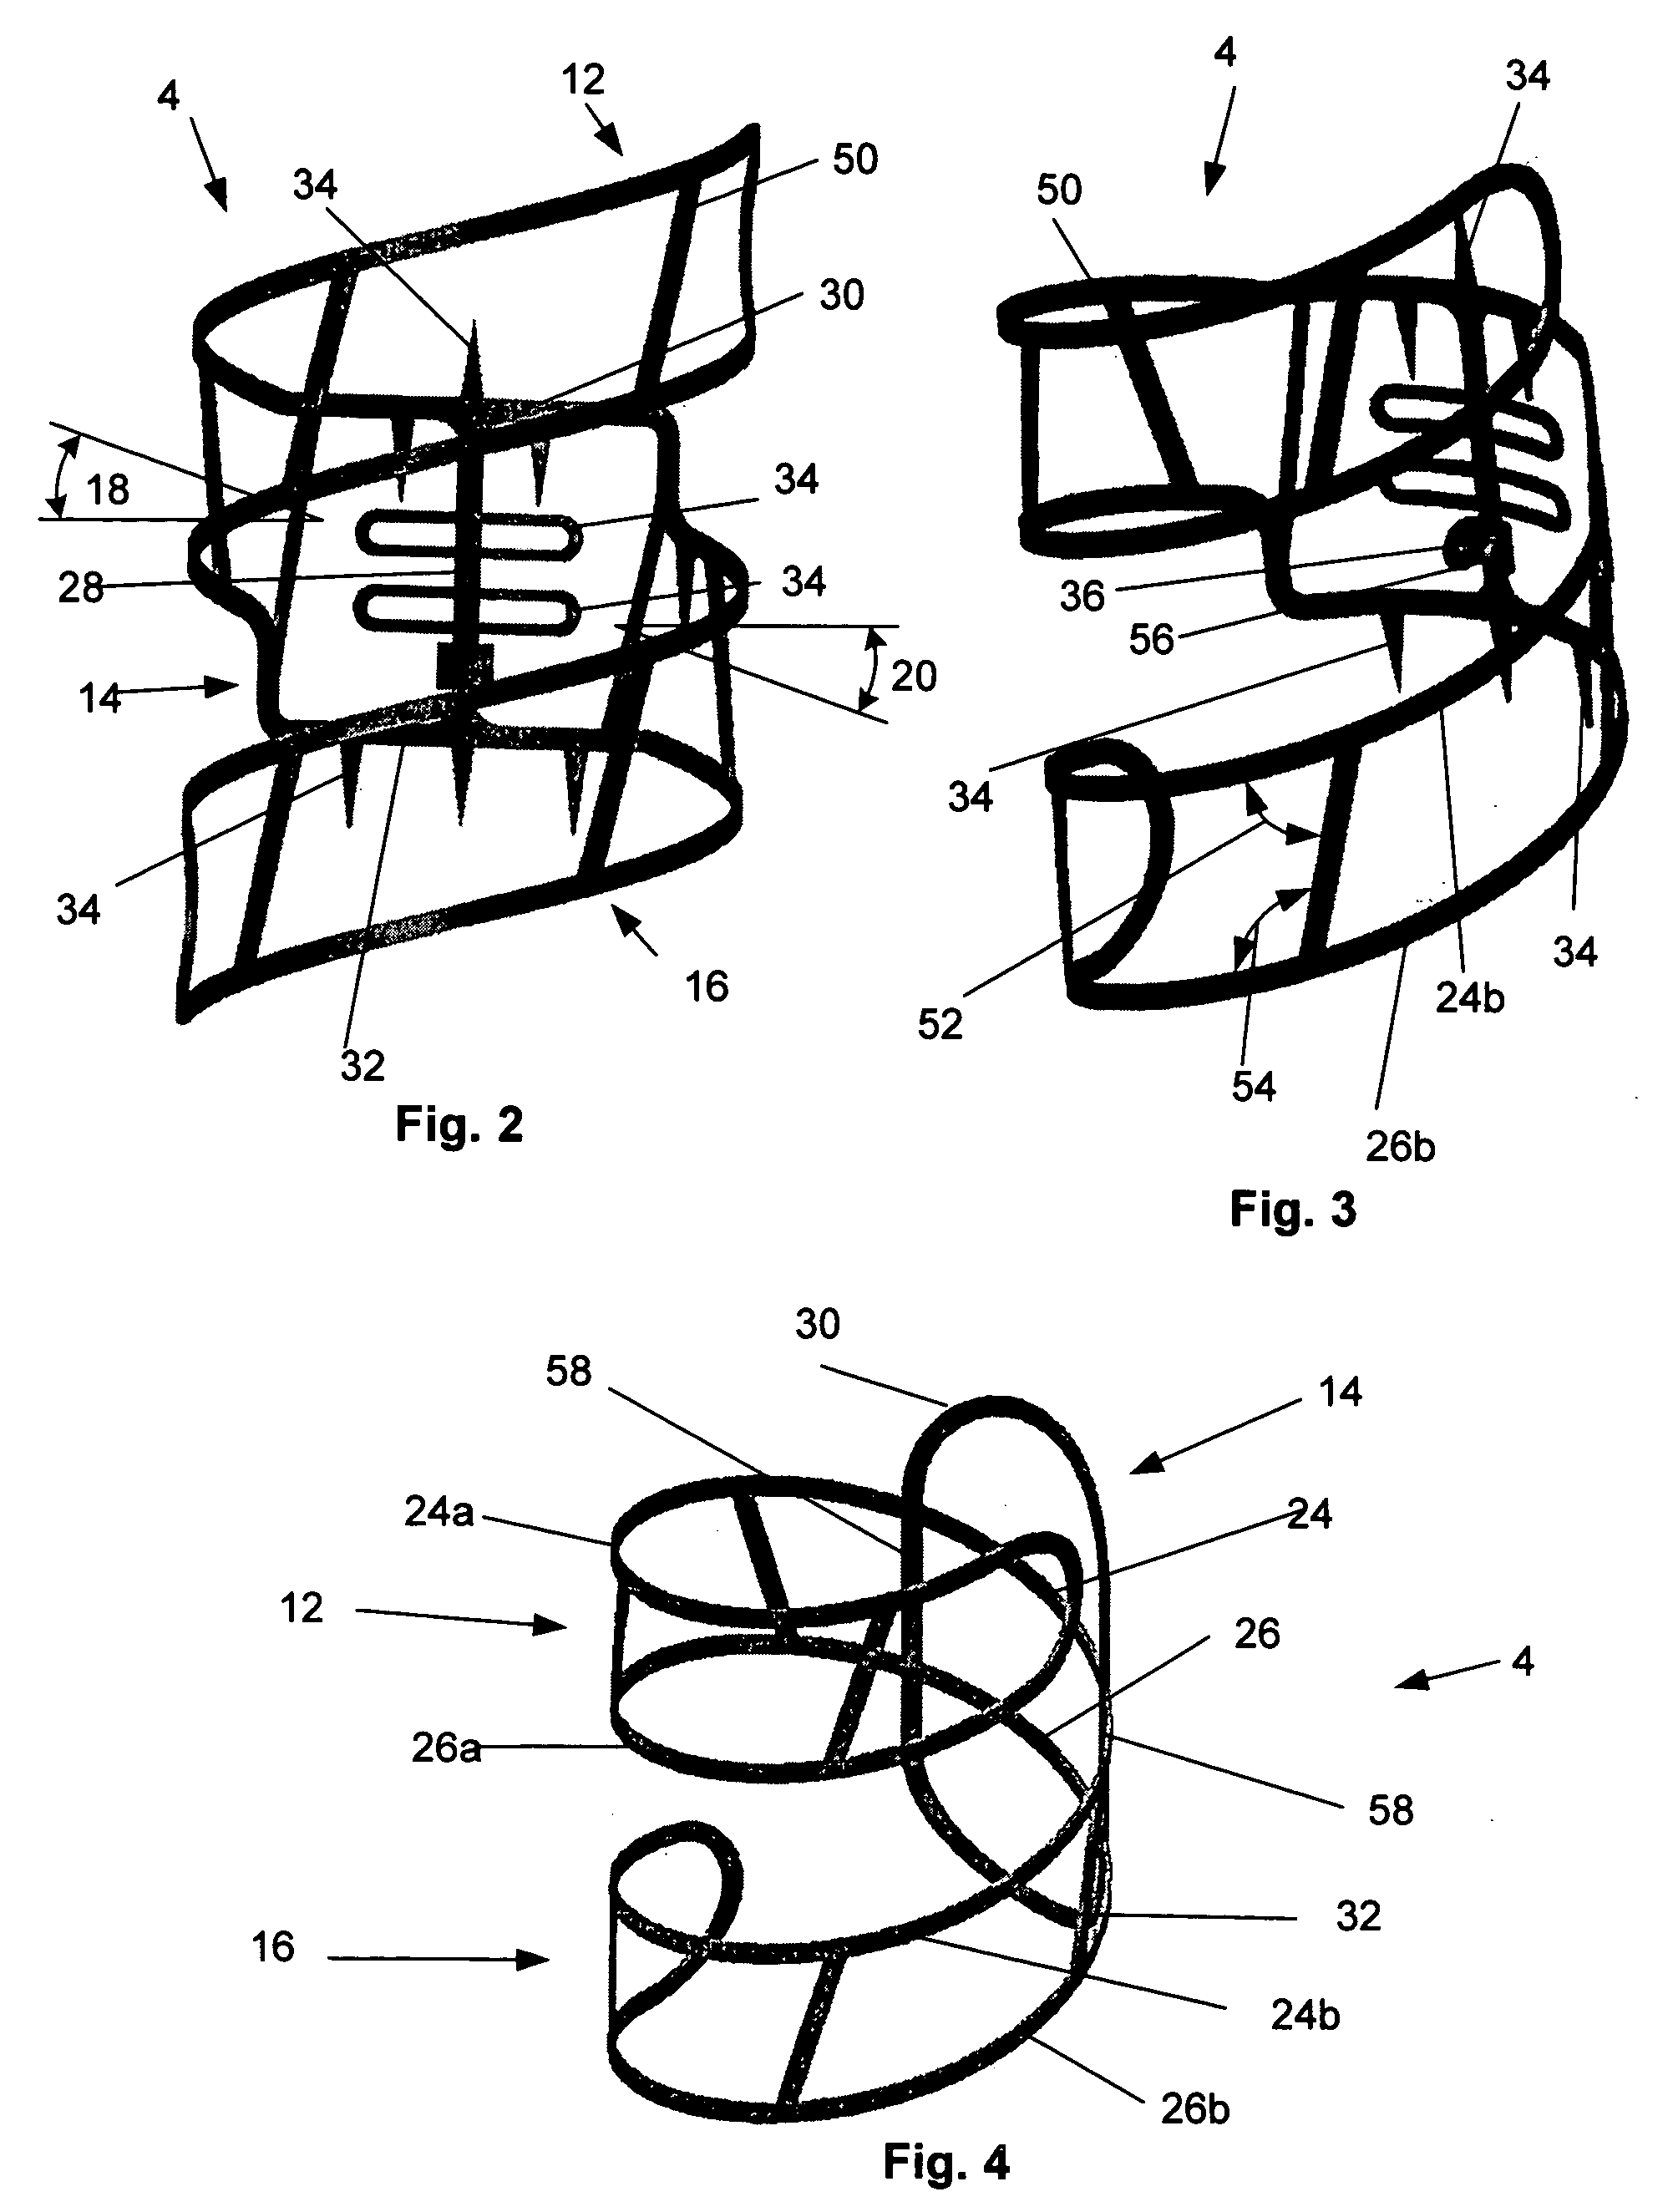 Vascular fixation device and method